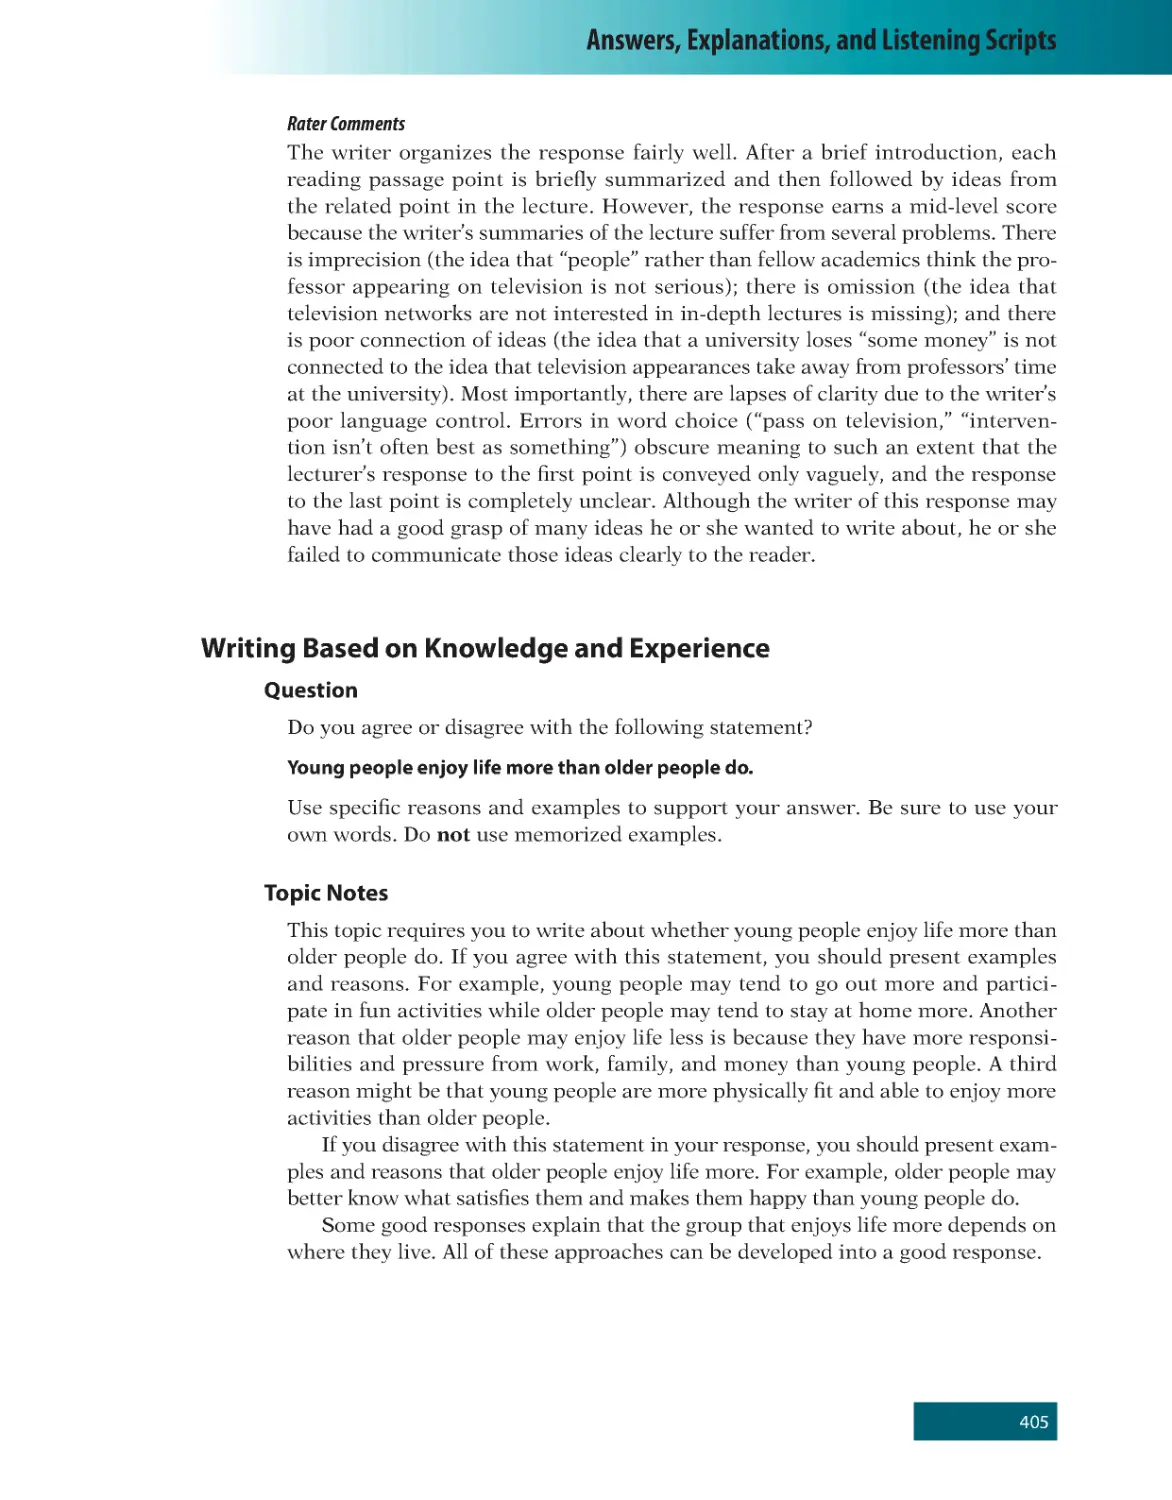 Rater Comments
Writing Based on Knowledge and Experience
Topic Notes